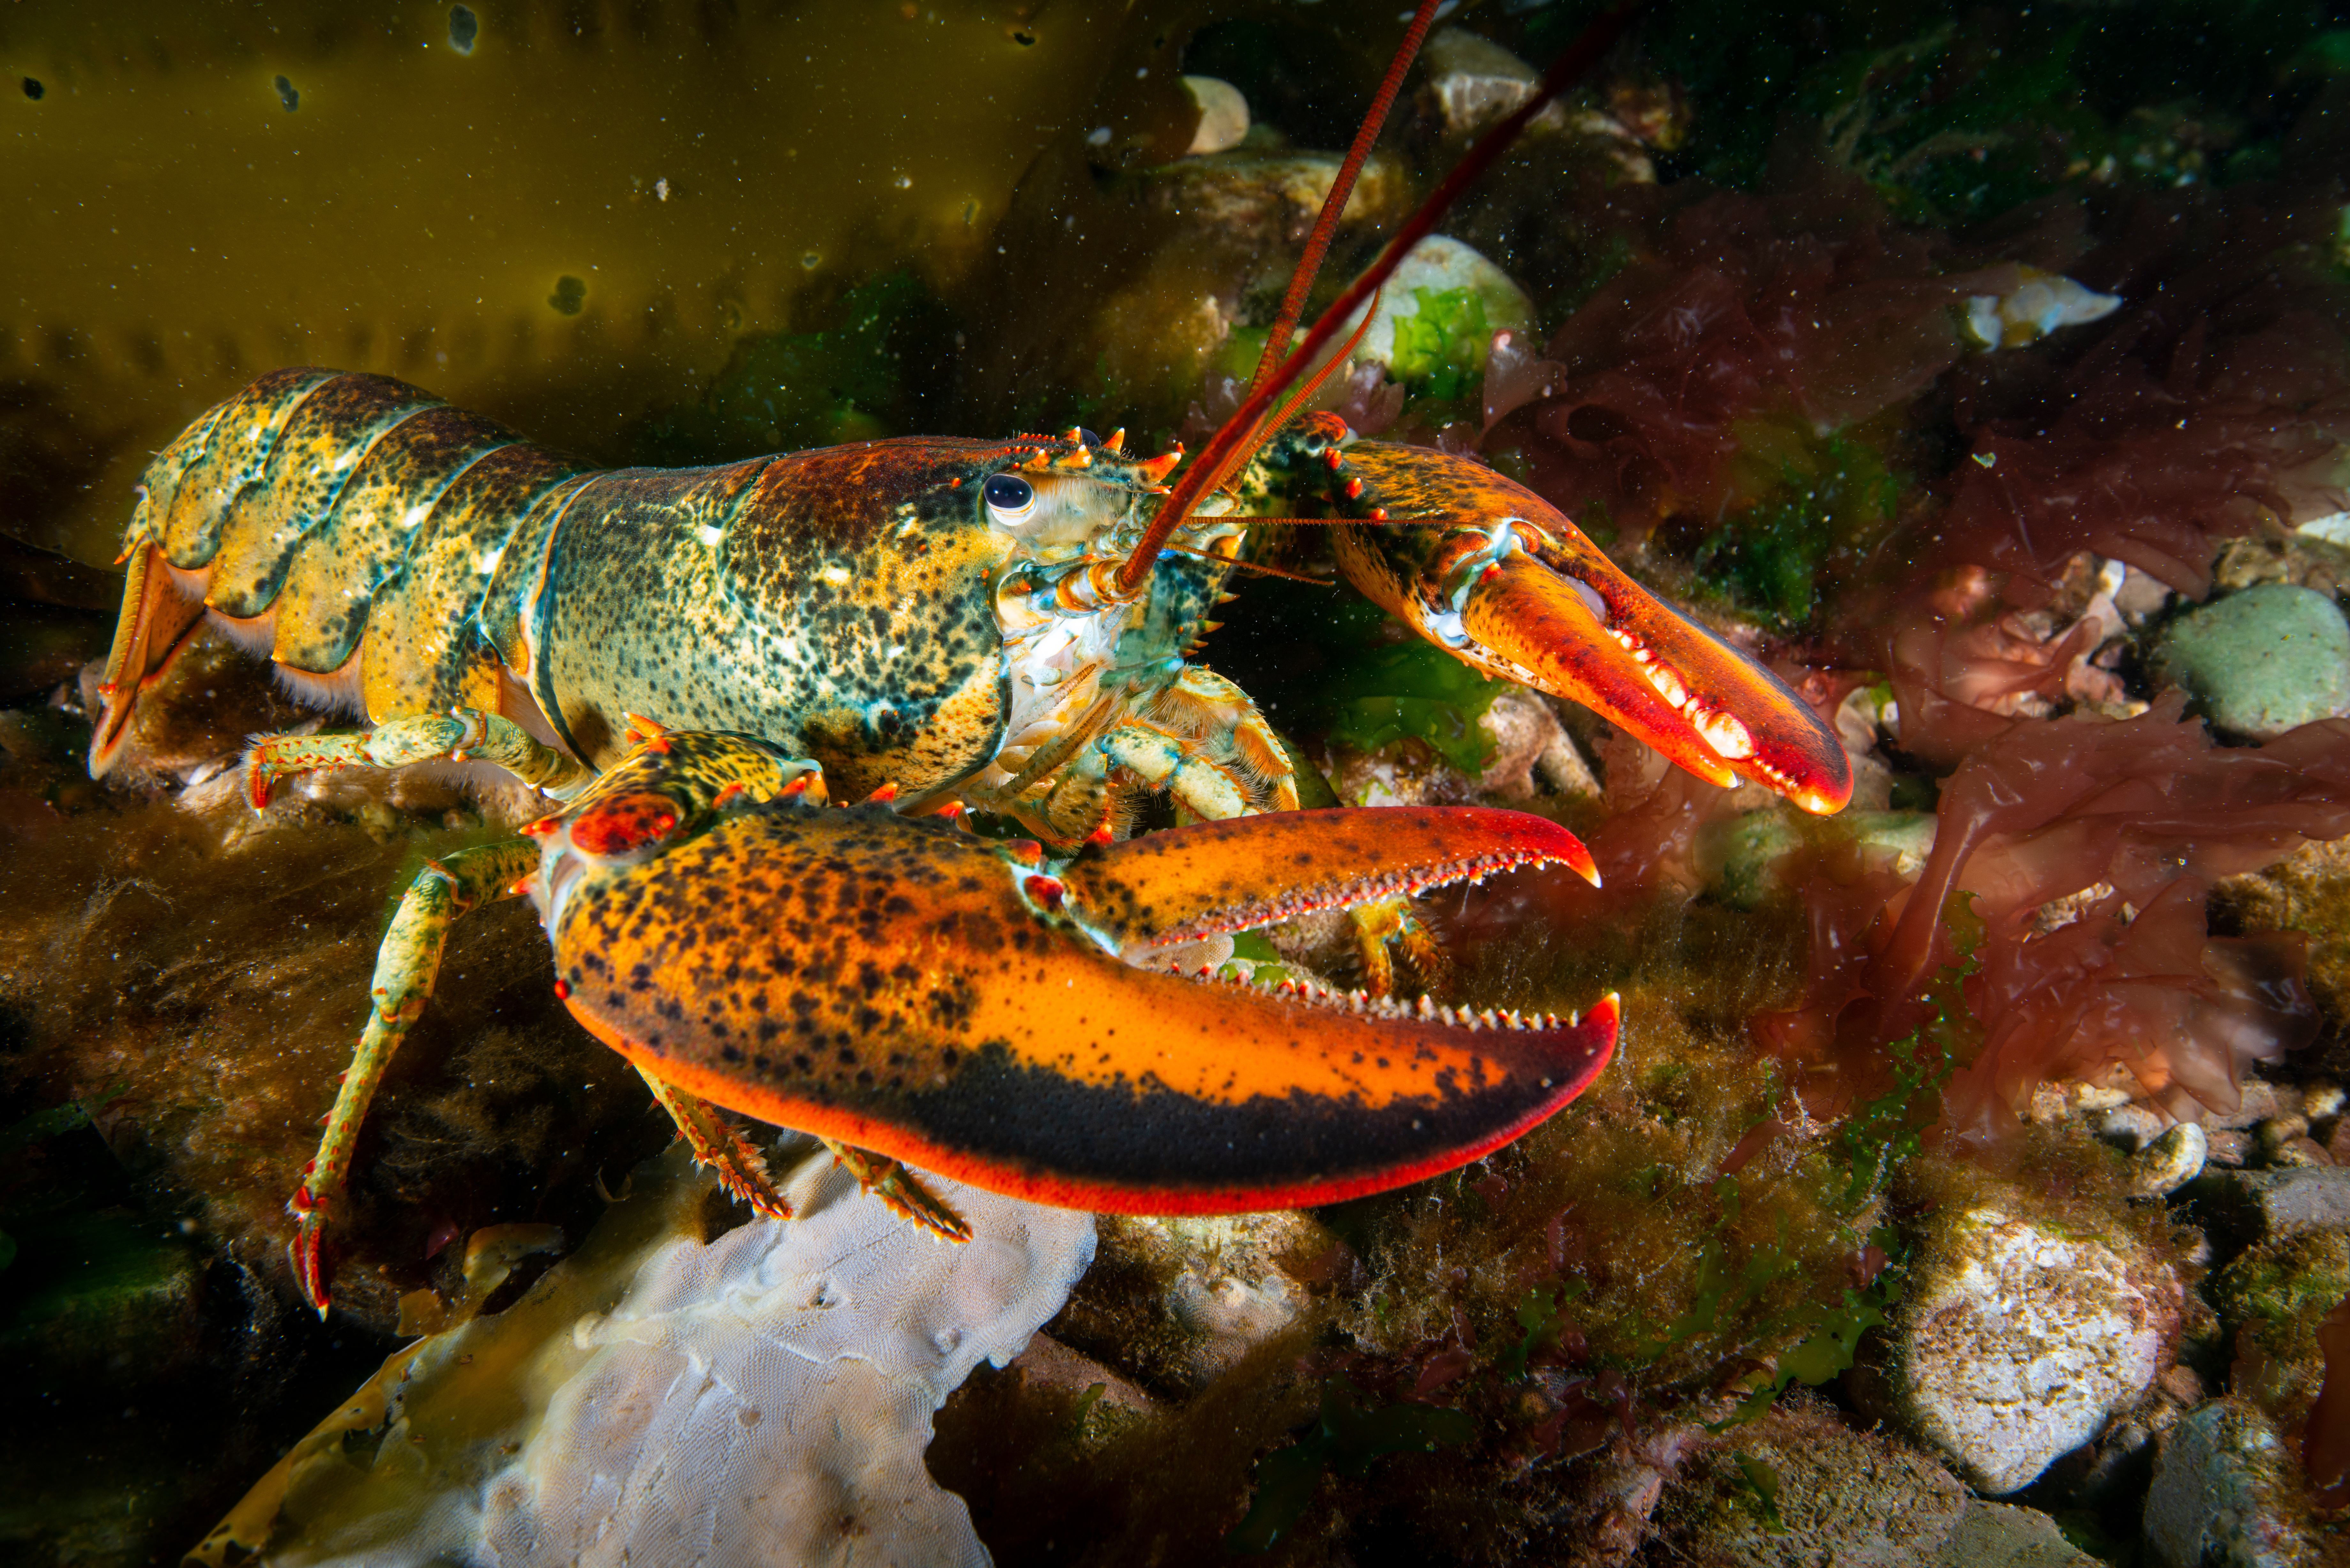 When Do Lobsters Molt?